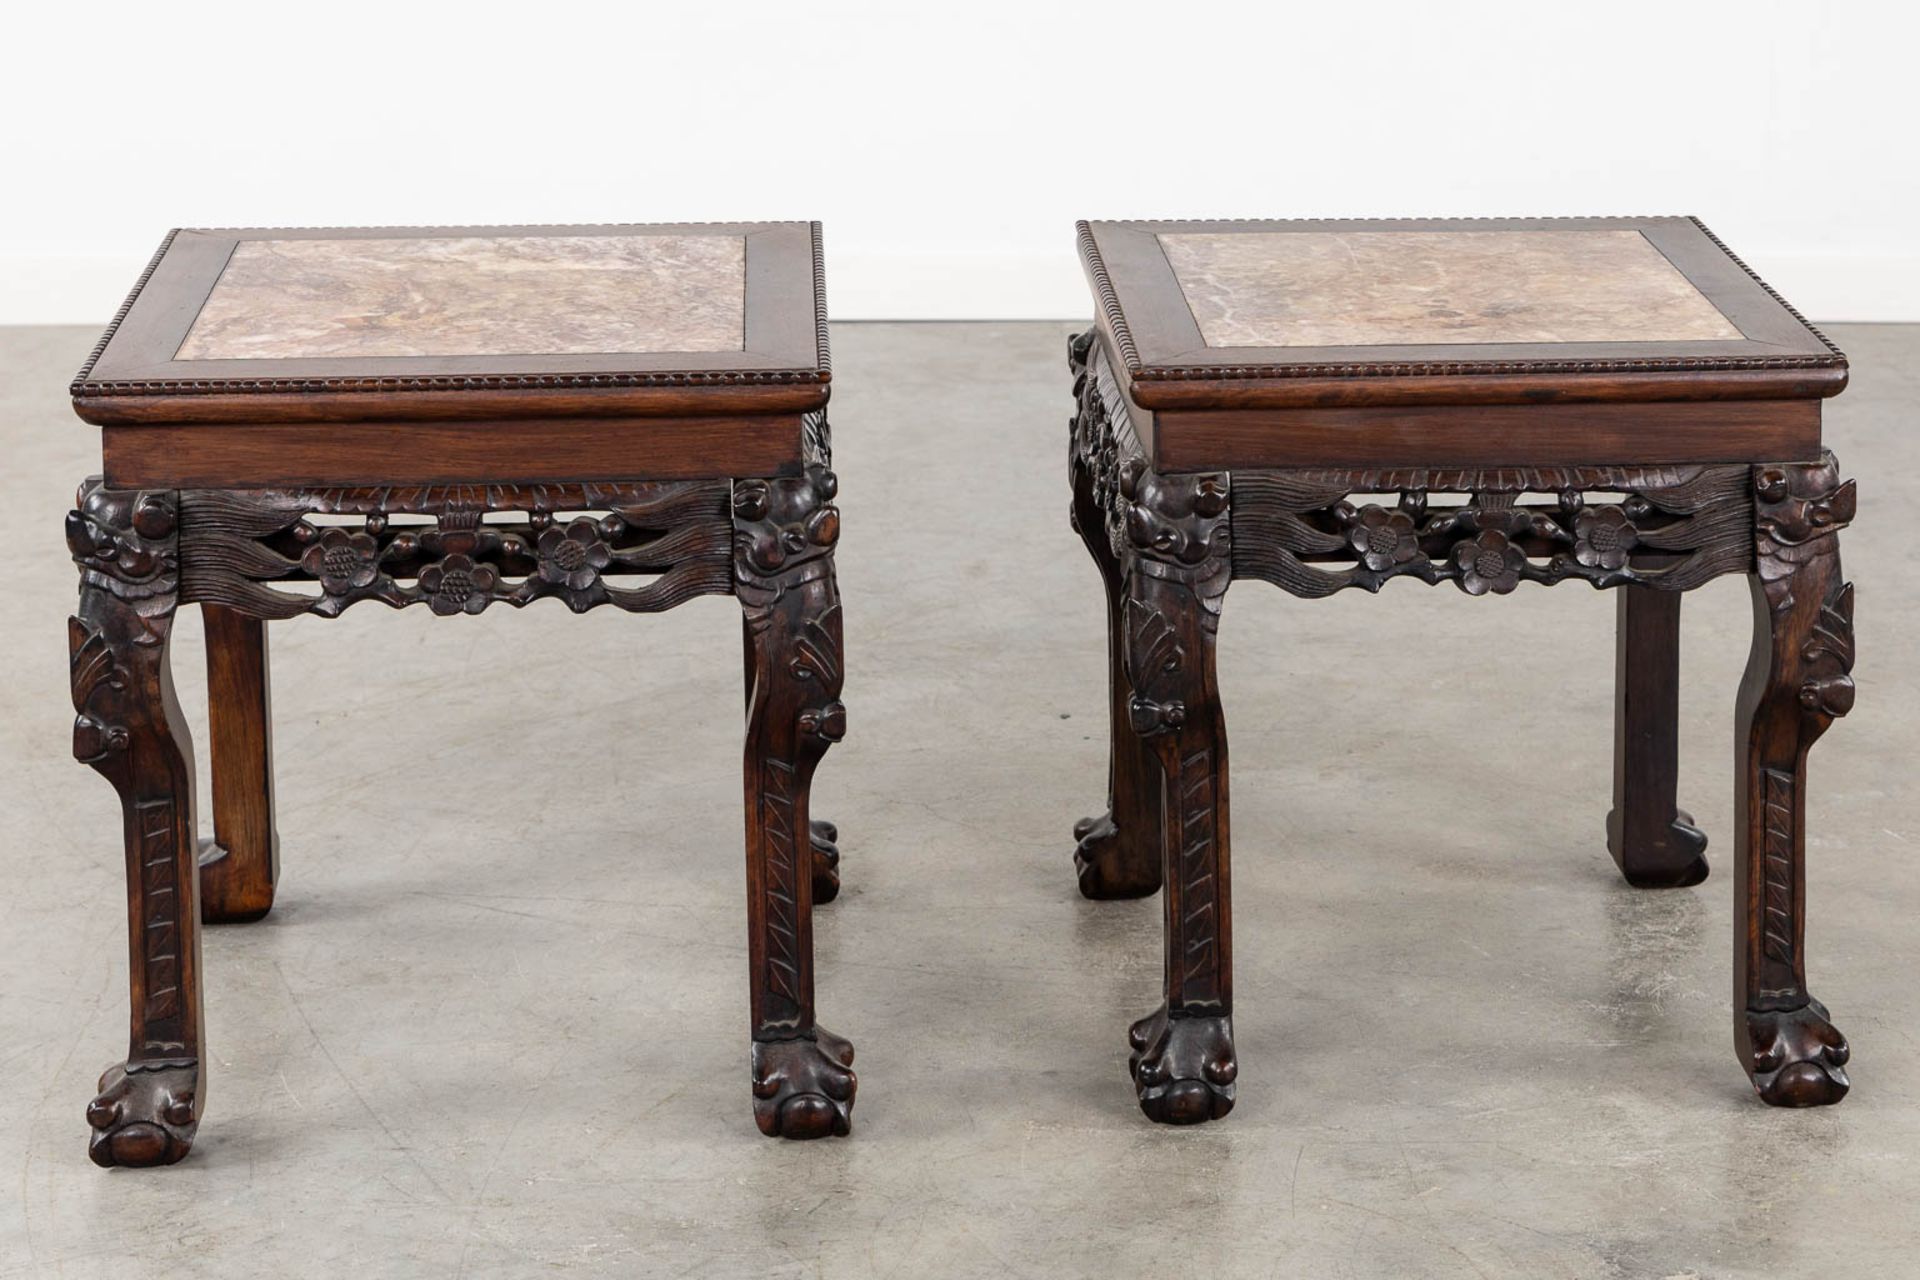 A pair of square Chinese side tables, hardwood with a marble top. (L:44 x W:44 x H:46 cm) - Bild 6 aus 11